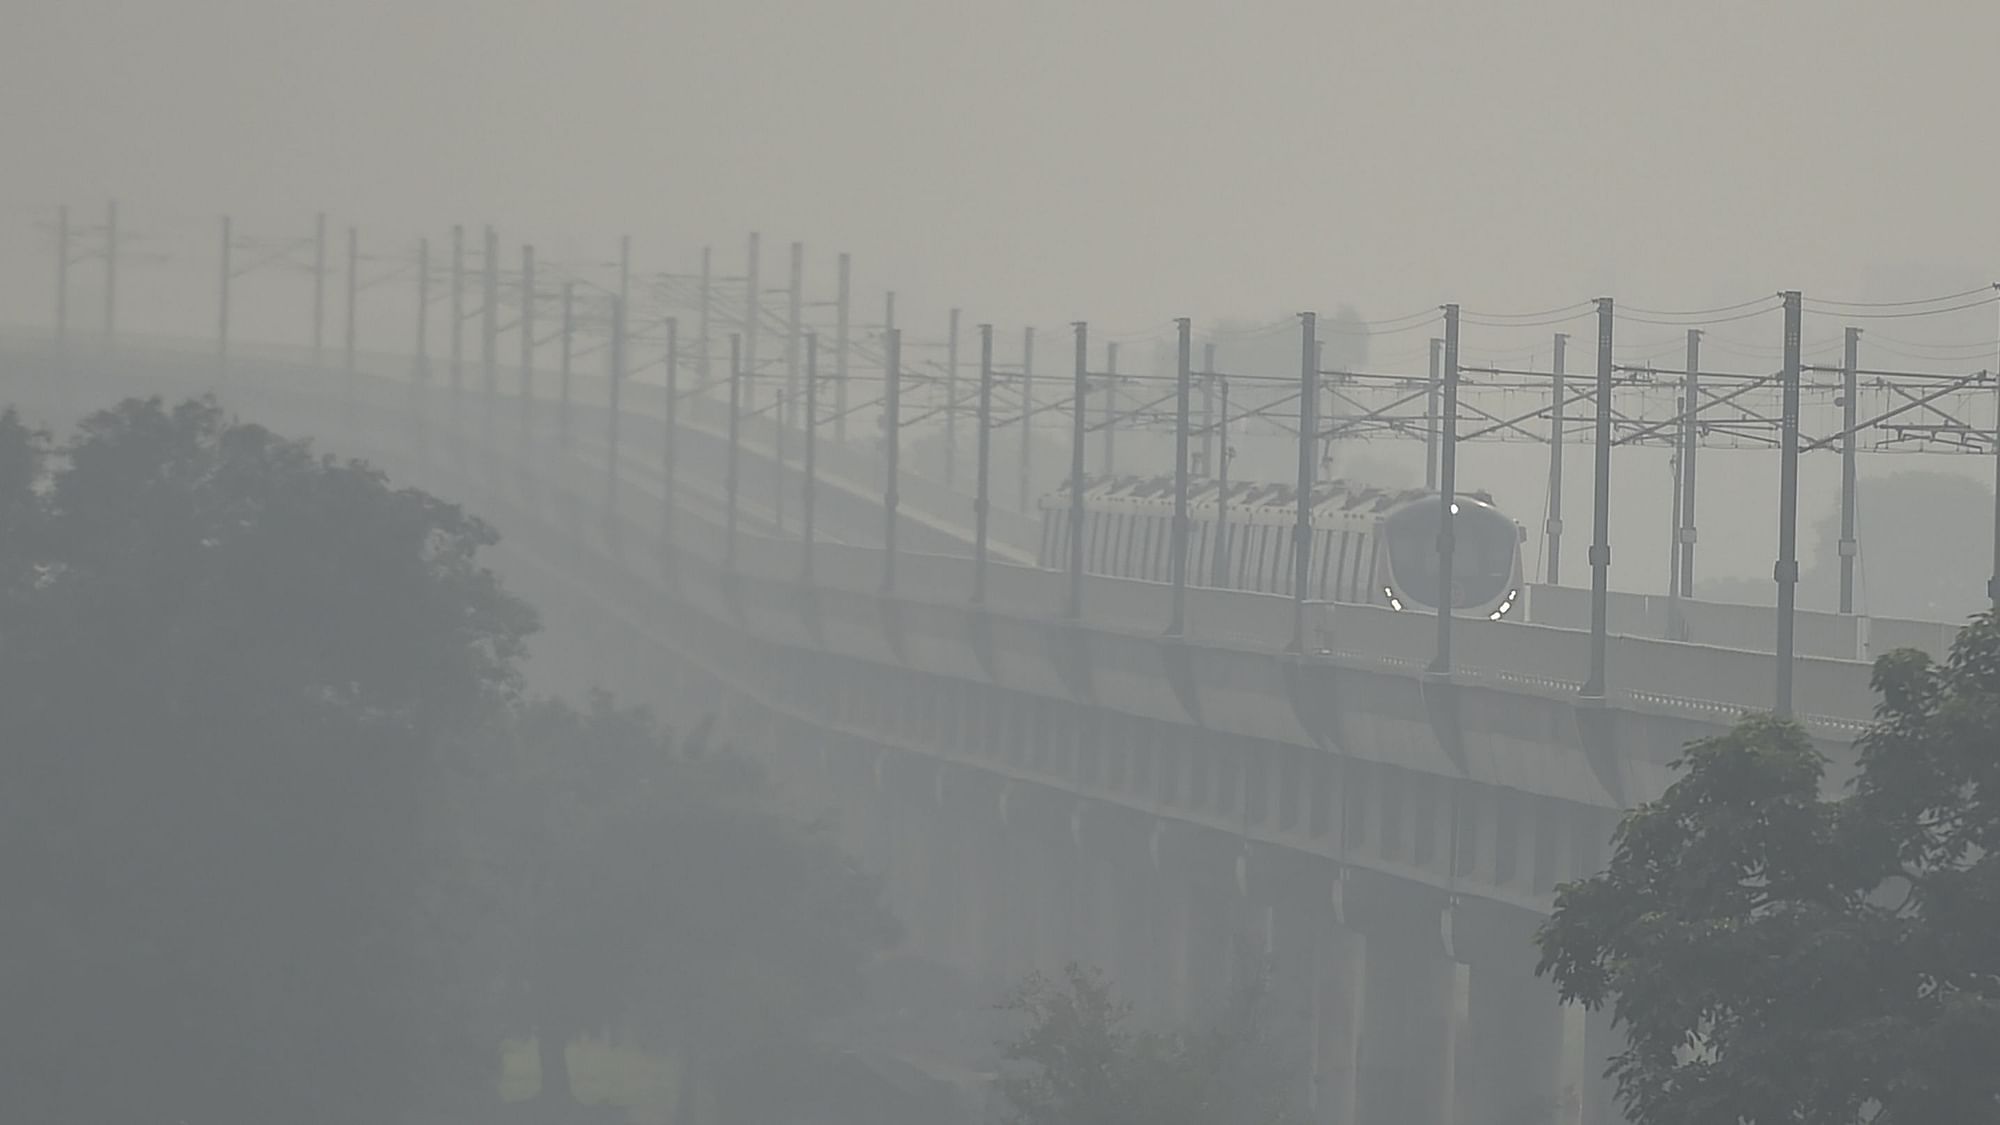  India is home to 22 of the world’s 30 most polluted cities